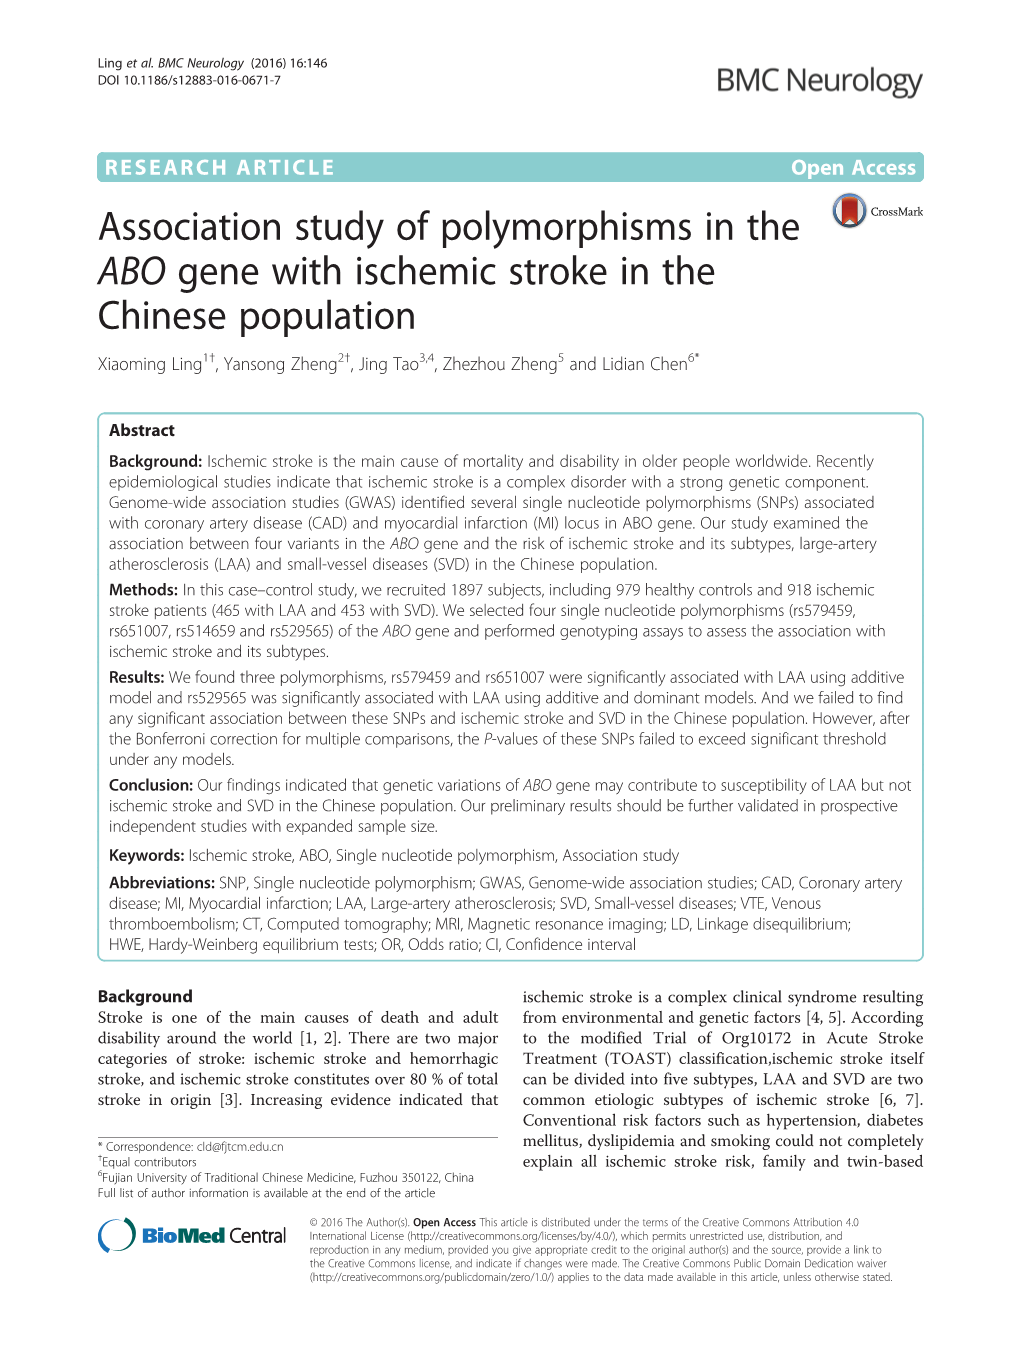 Association Study of Polymorphisms in the ABO Gene with Ischemic Stroke